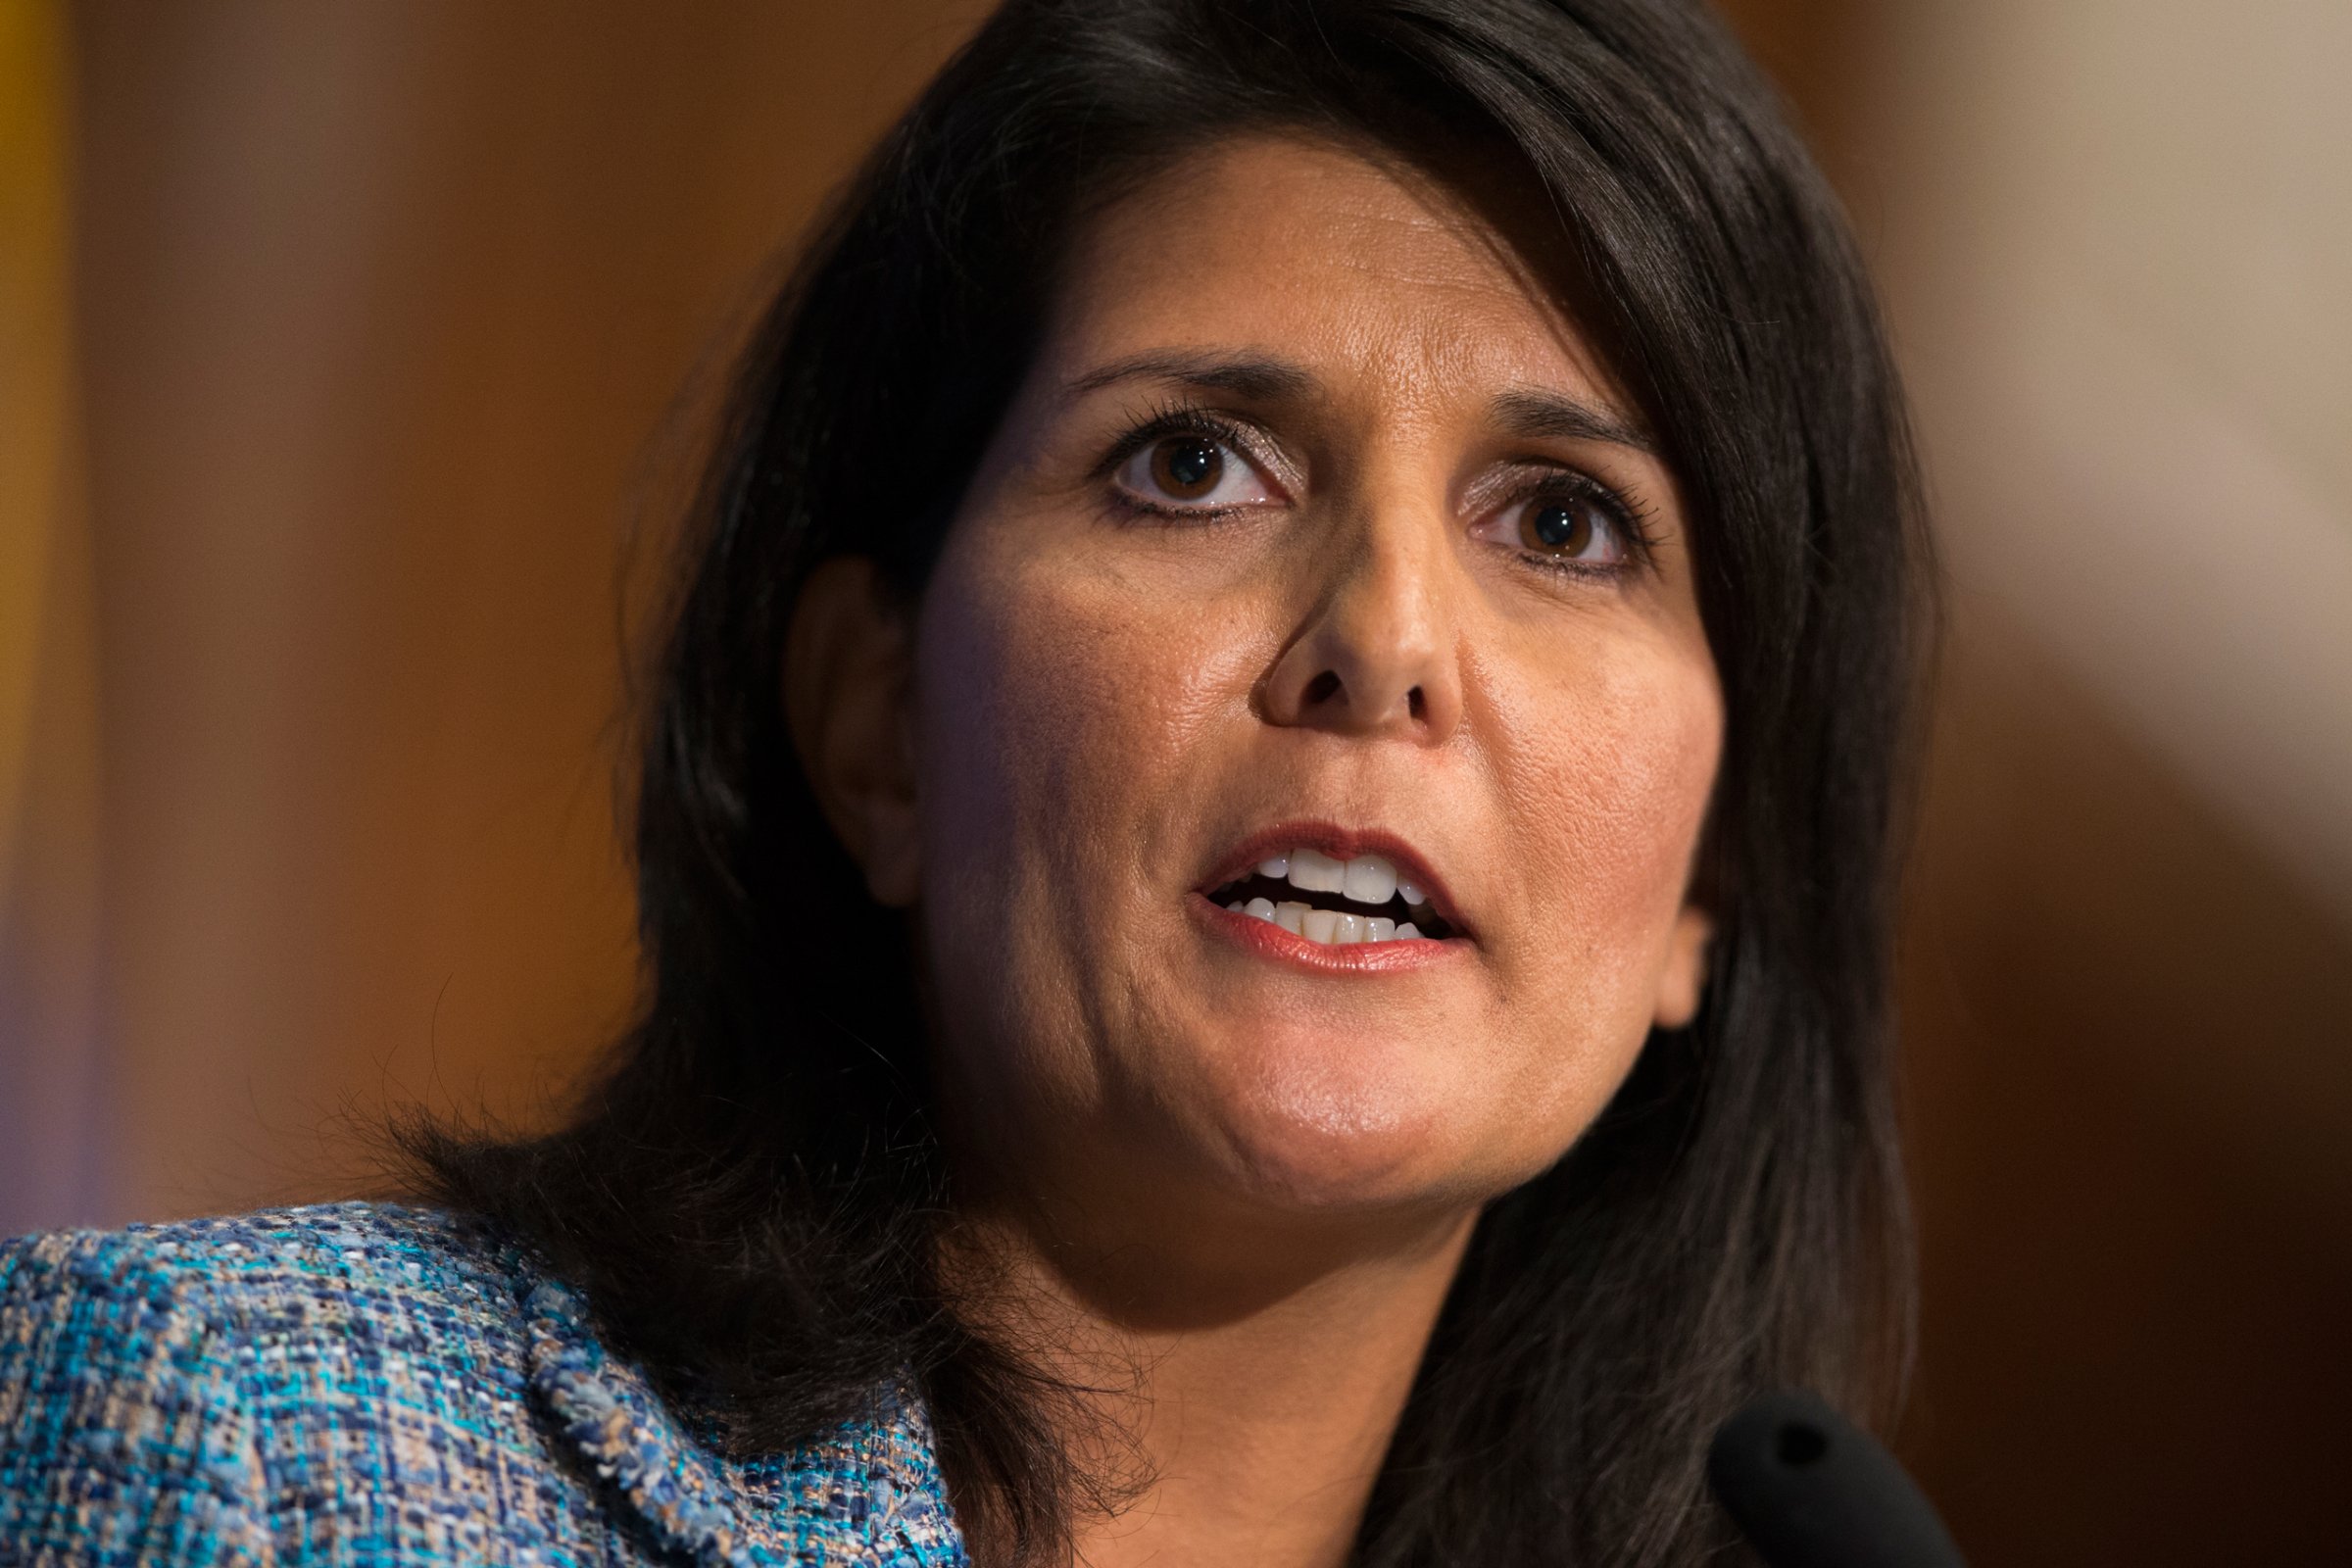 Gov. Nikki Haley, R- S.C., delivers a speech on "Lessons from the New South" during a luncheon at the National Press Club, on Wednesday, Sept. 2, 2015, in Washington. (AP Photo/Evan Vucci)